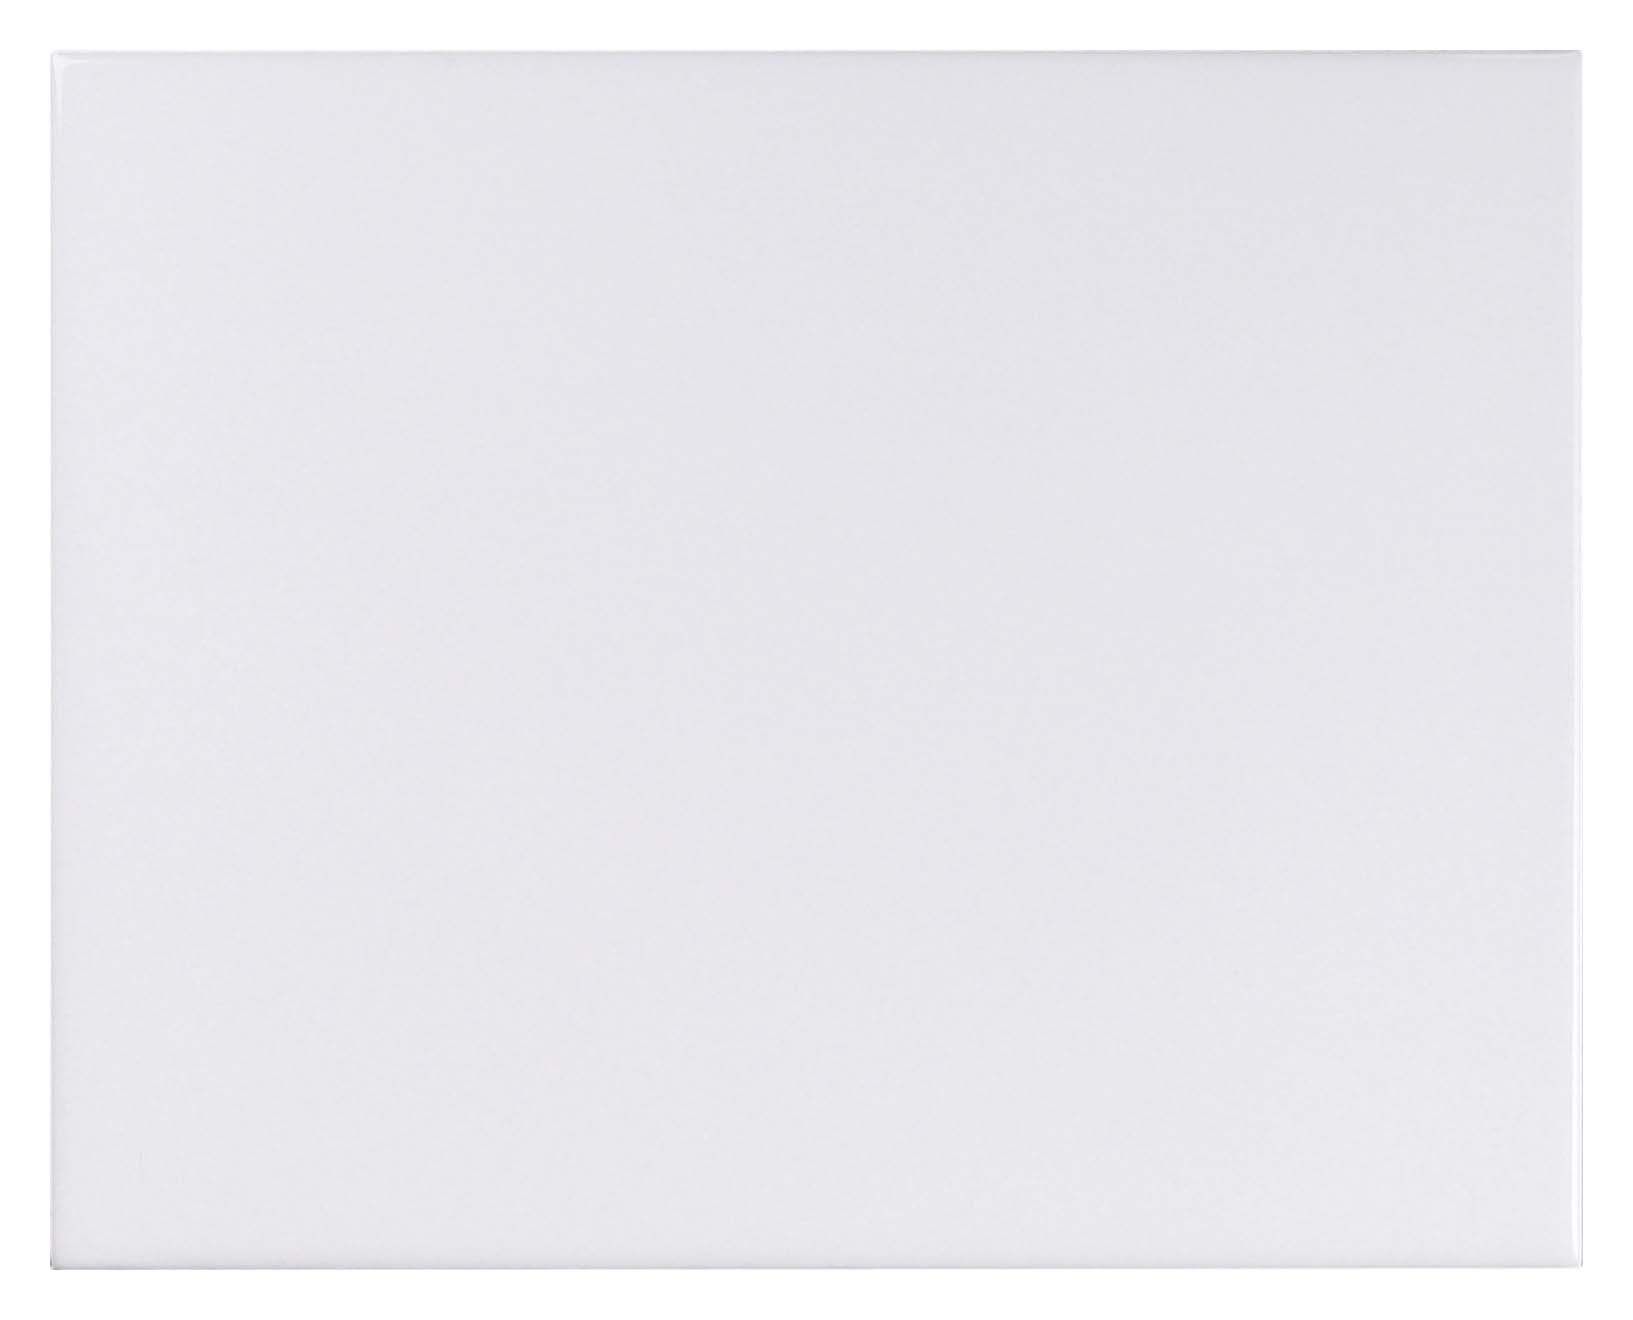 Image of Wickes White Ceramic Wall Tile 200 x 250mm Sample